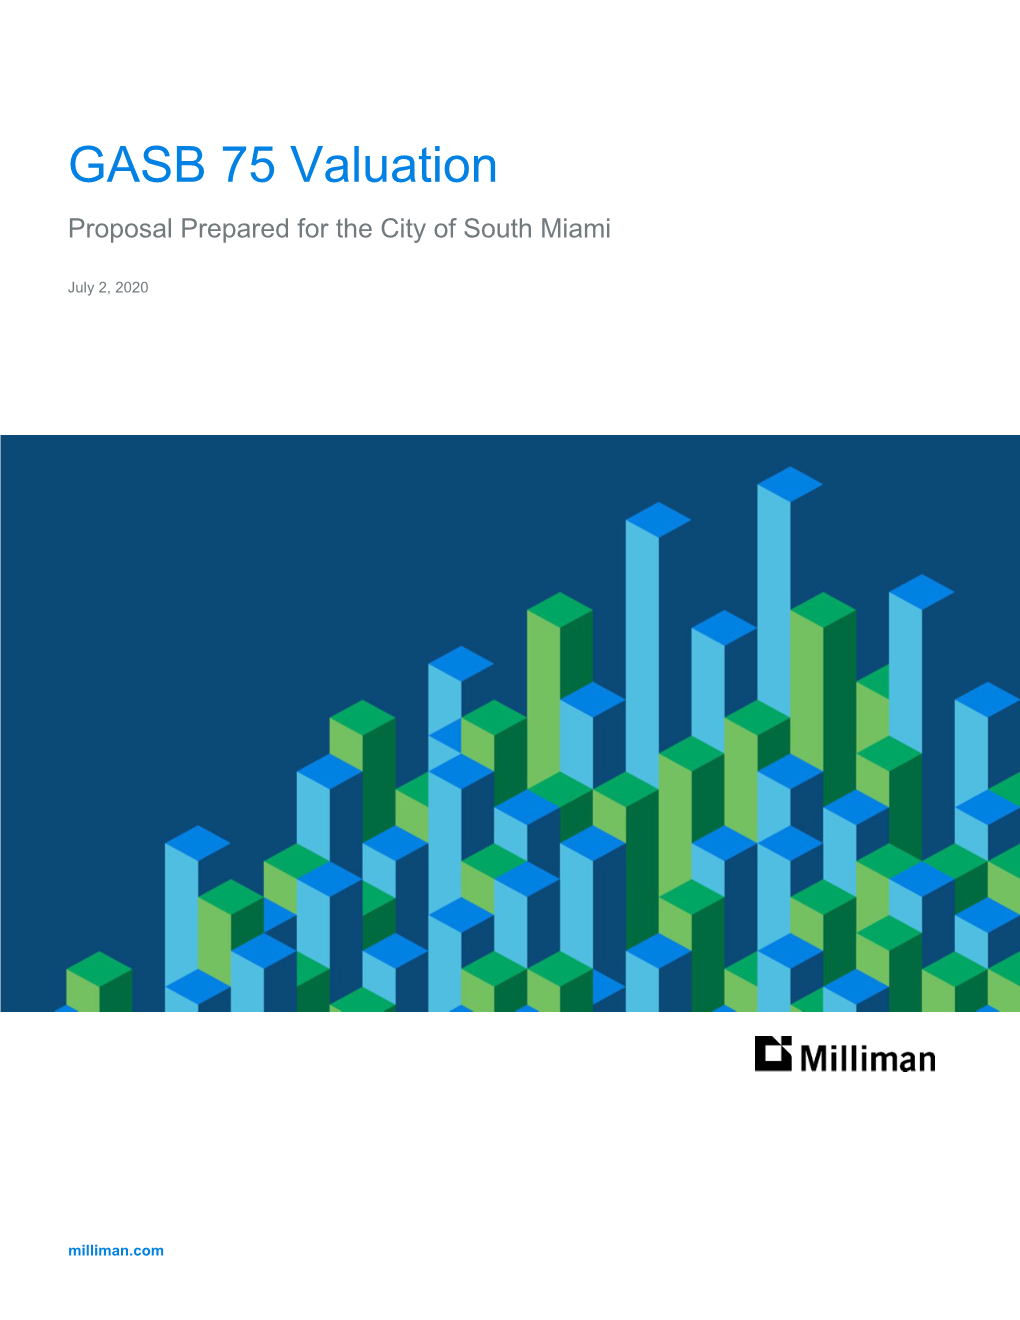 GASB 75 Valuation Proposal Prepared for the City of South Miami